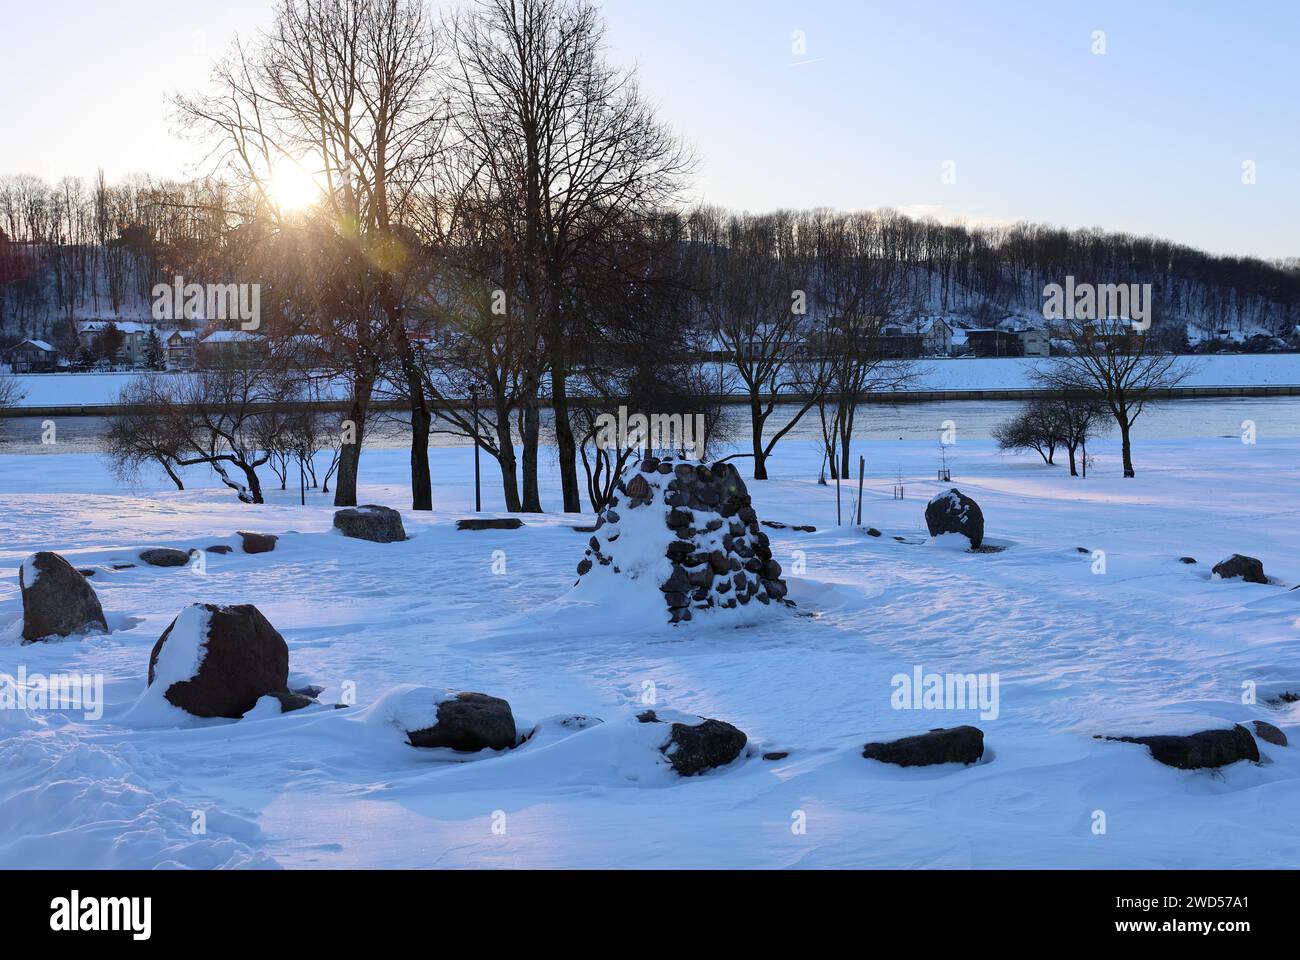 The sunset view of a historic pagan altar that is still in operation in Kaunas old town park by Neman River (Lithuania). Stock Photo